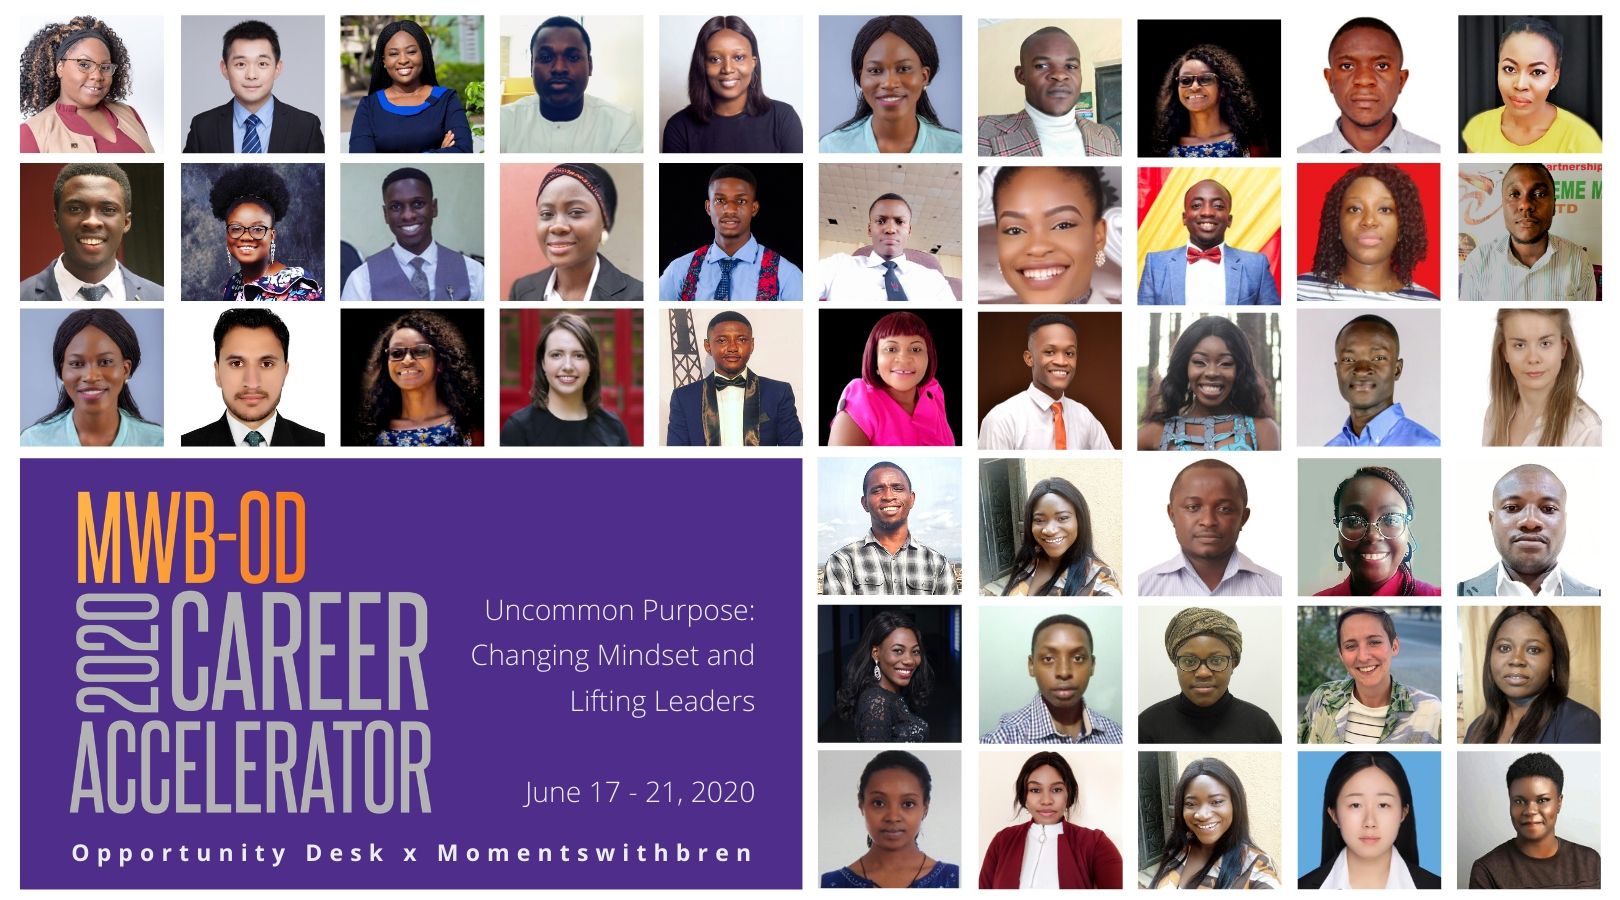 MWB-OD hosts 1st Career Accelerator Program 2020 on “Uncommon Purpose: Changing Mindset and Lifting Leaders”